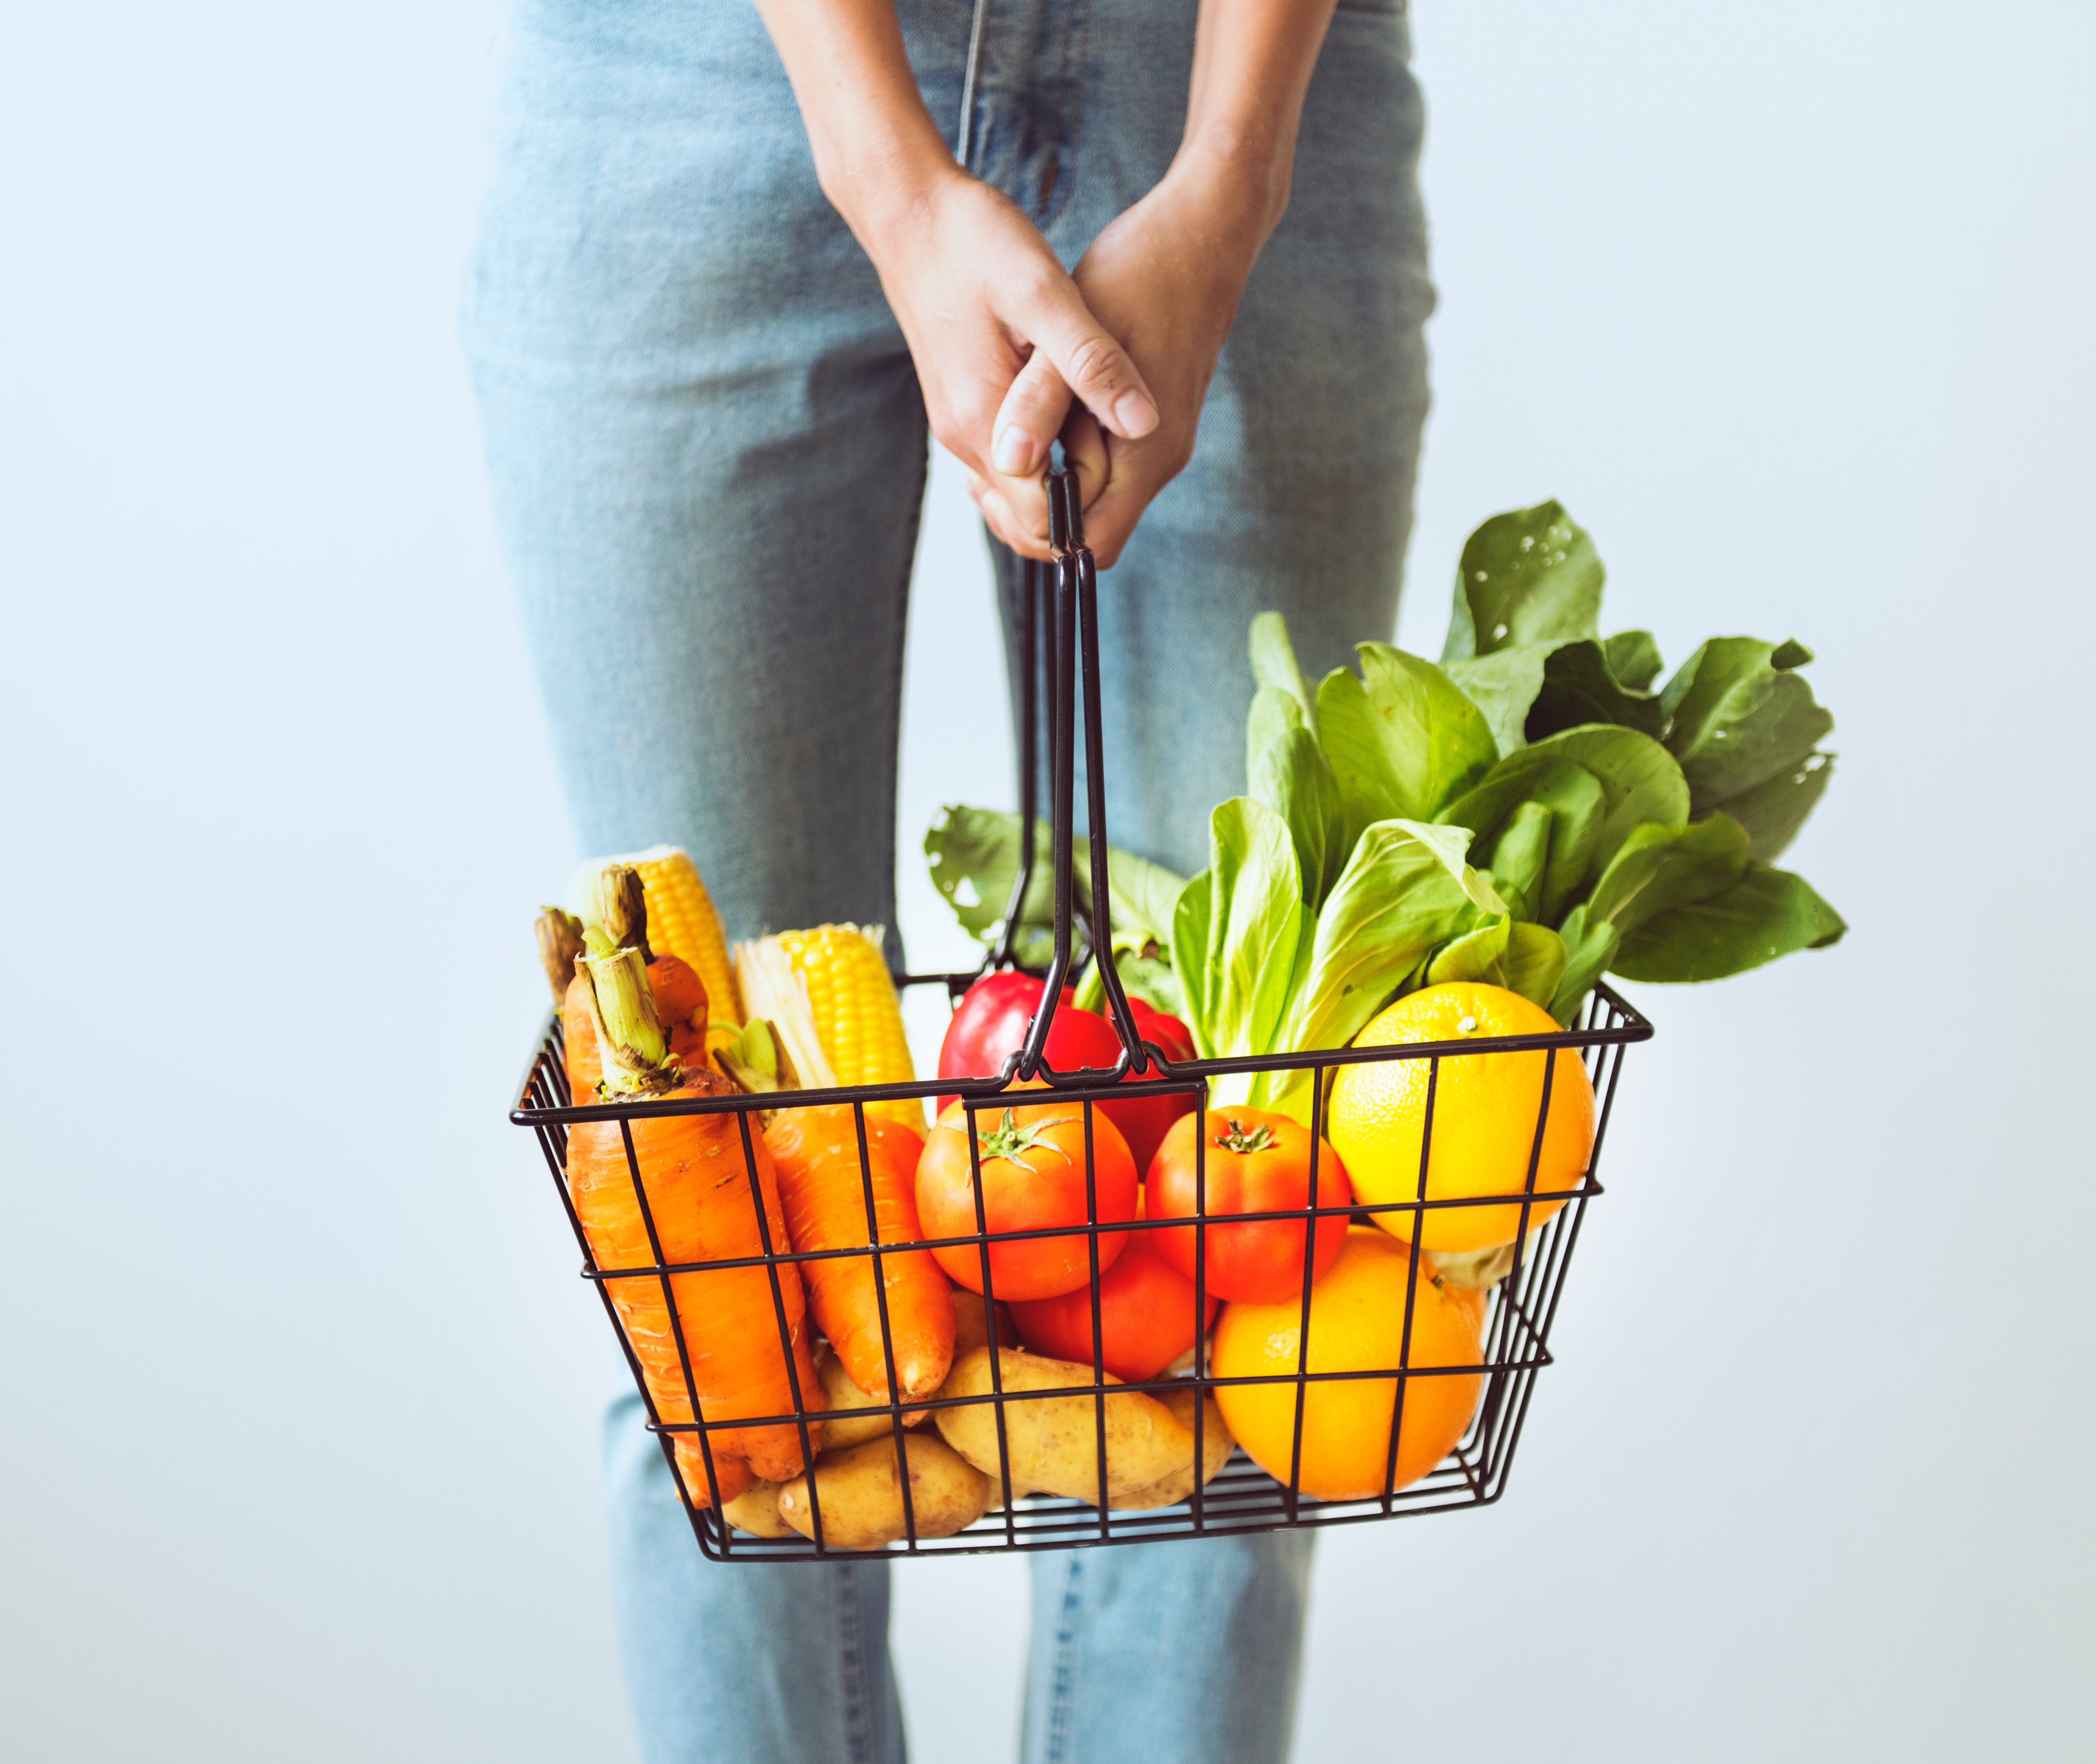 Save Money On Groceries - How To Cut Your Grocery Budget In Half